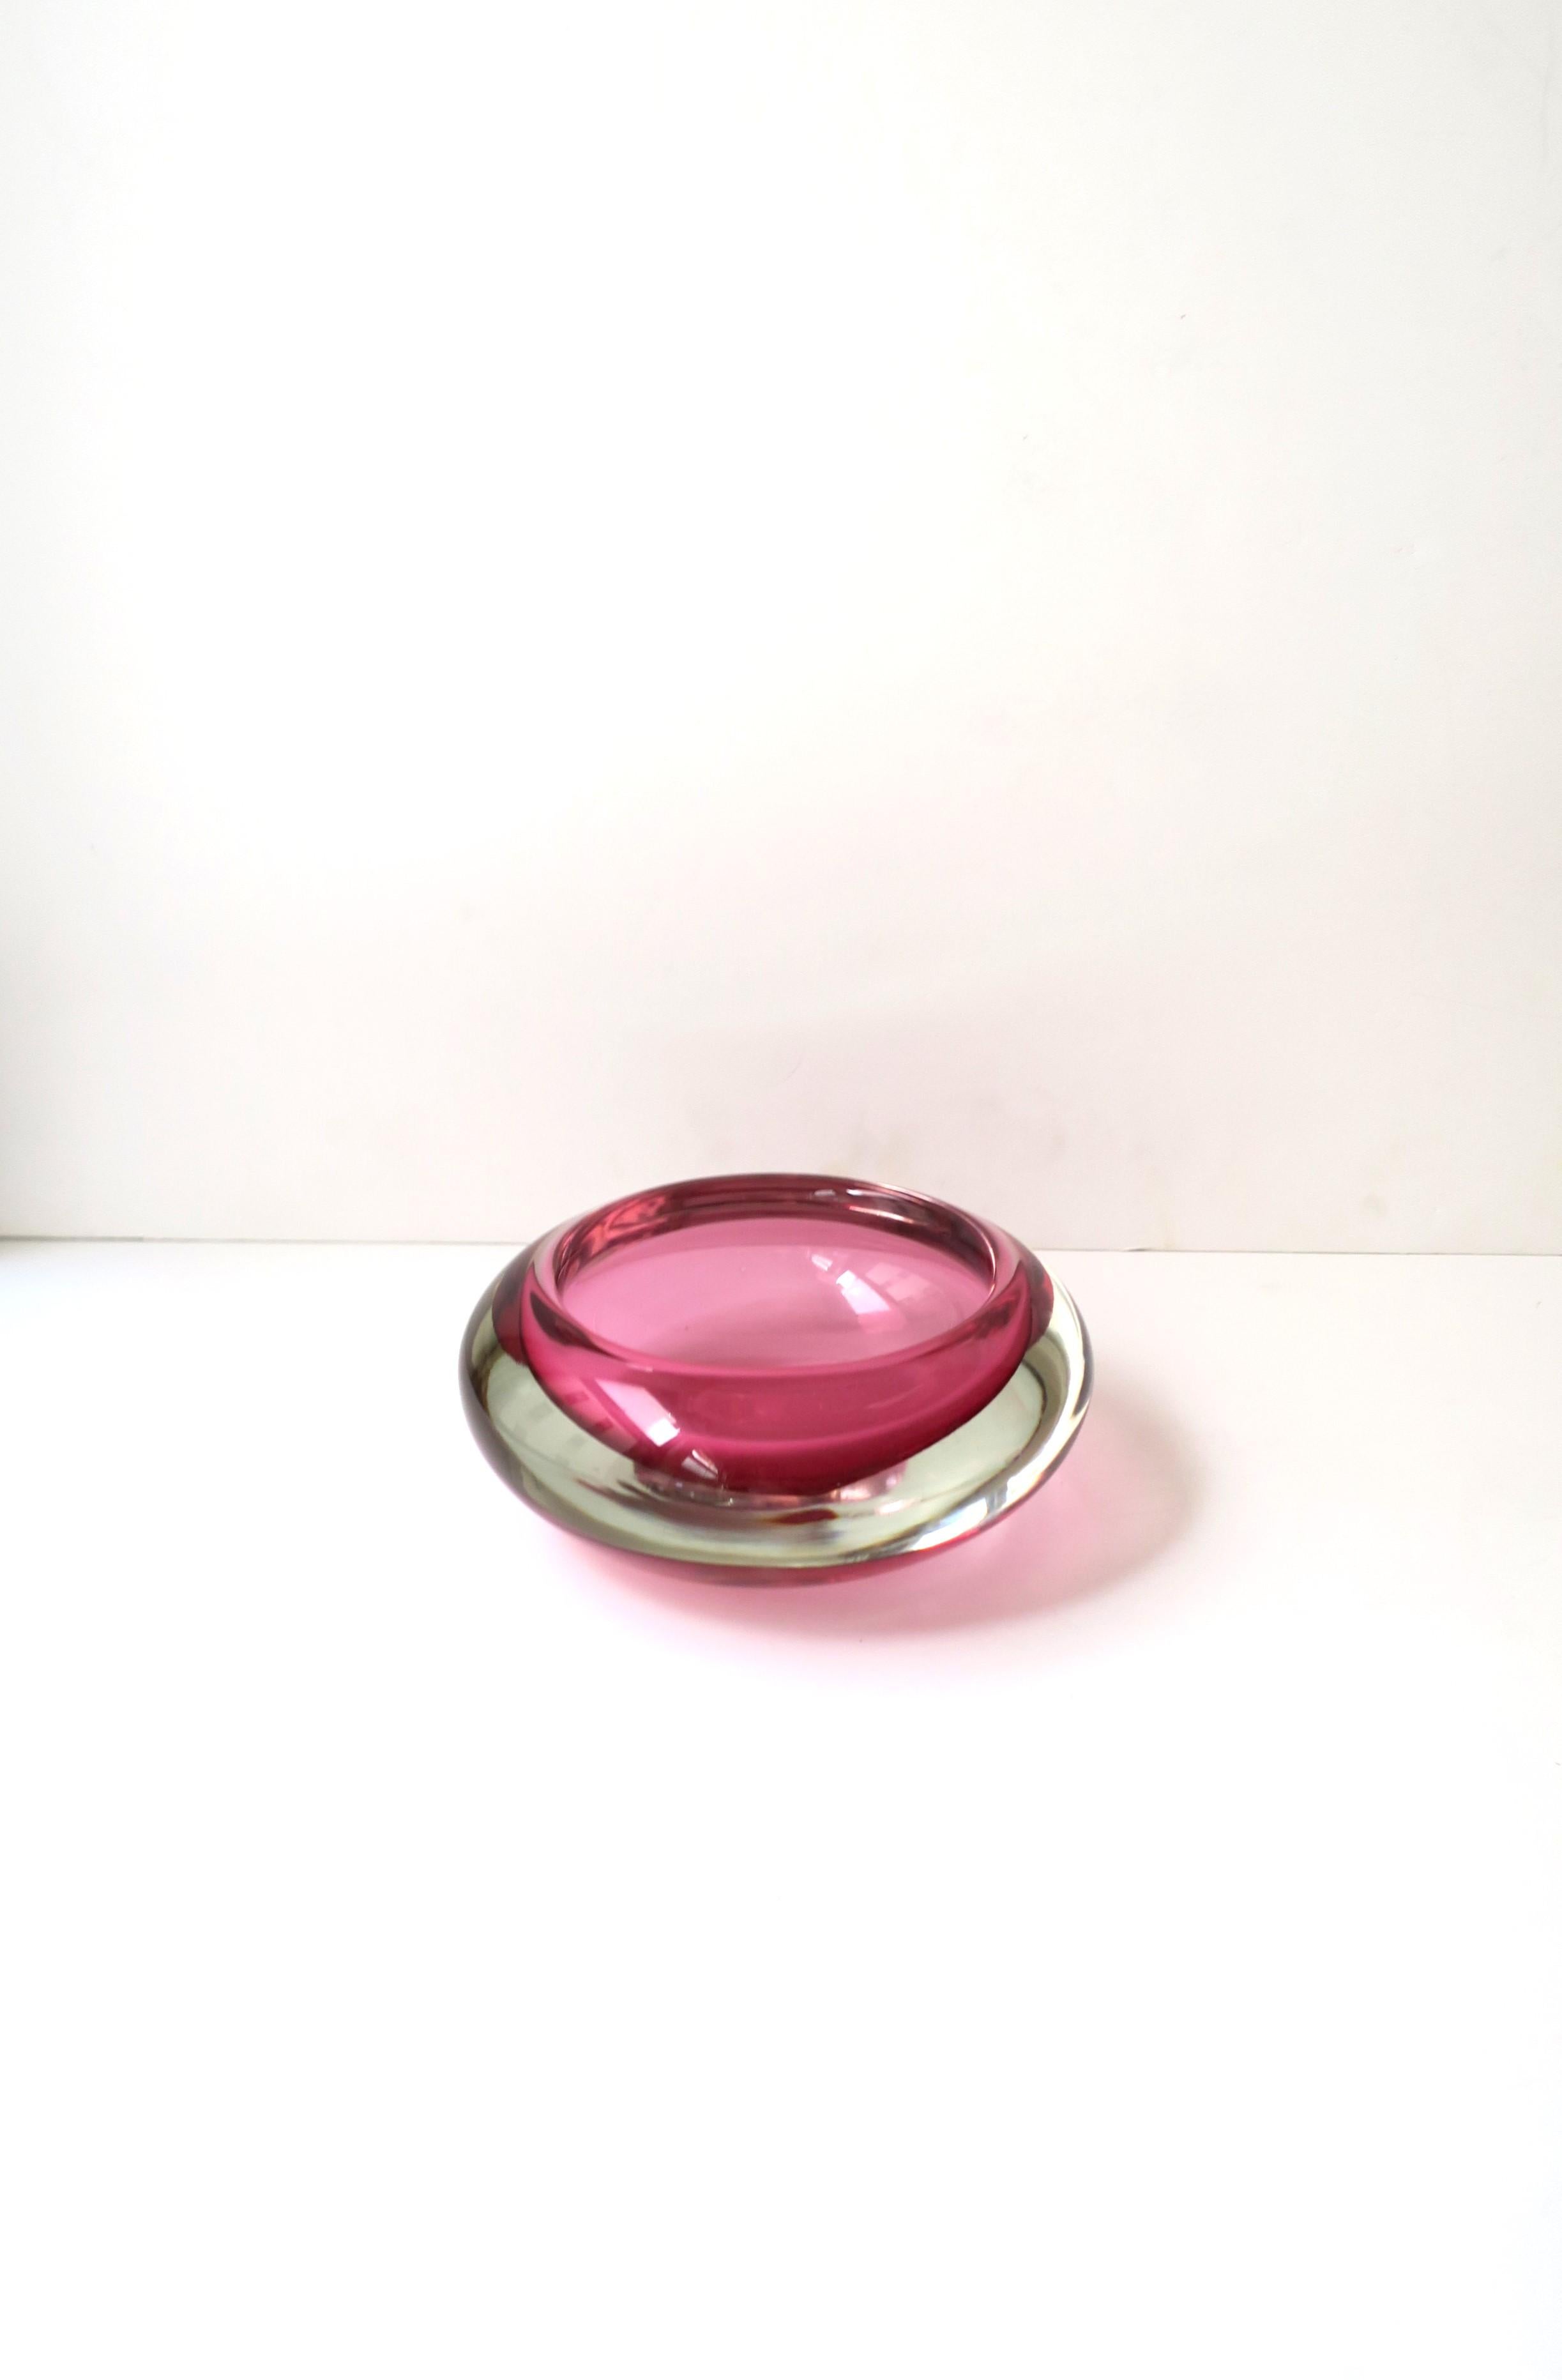 A beautiful and substantial pink and clear/transparent Italian Murano art glass bowl in the manner of designer Angelo Seguso, circa mid-20th century, Italy. Bowl is round in clear/transparent and pink Murano art glass. A great piece for a cocktail